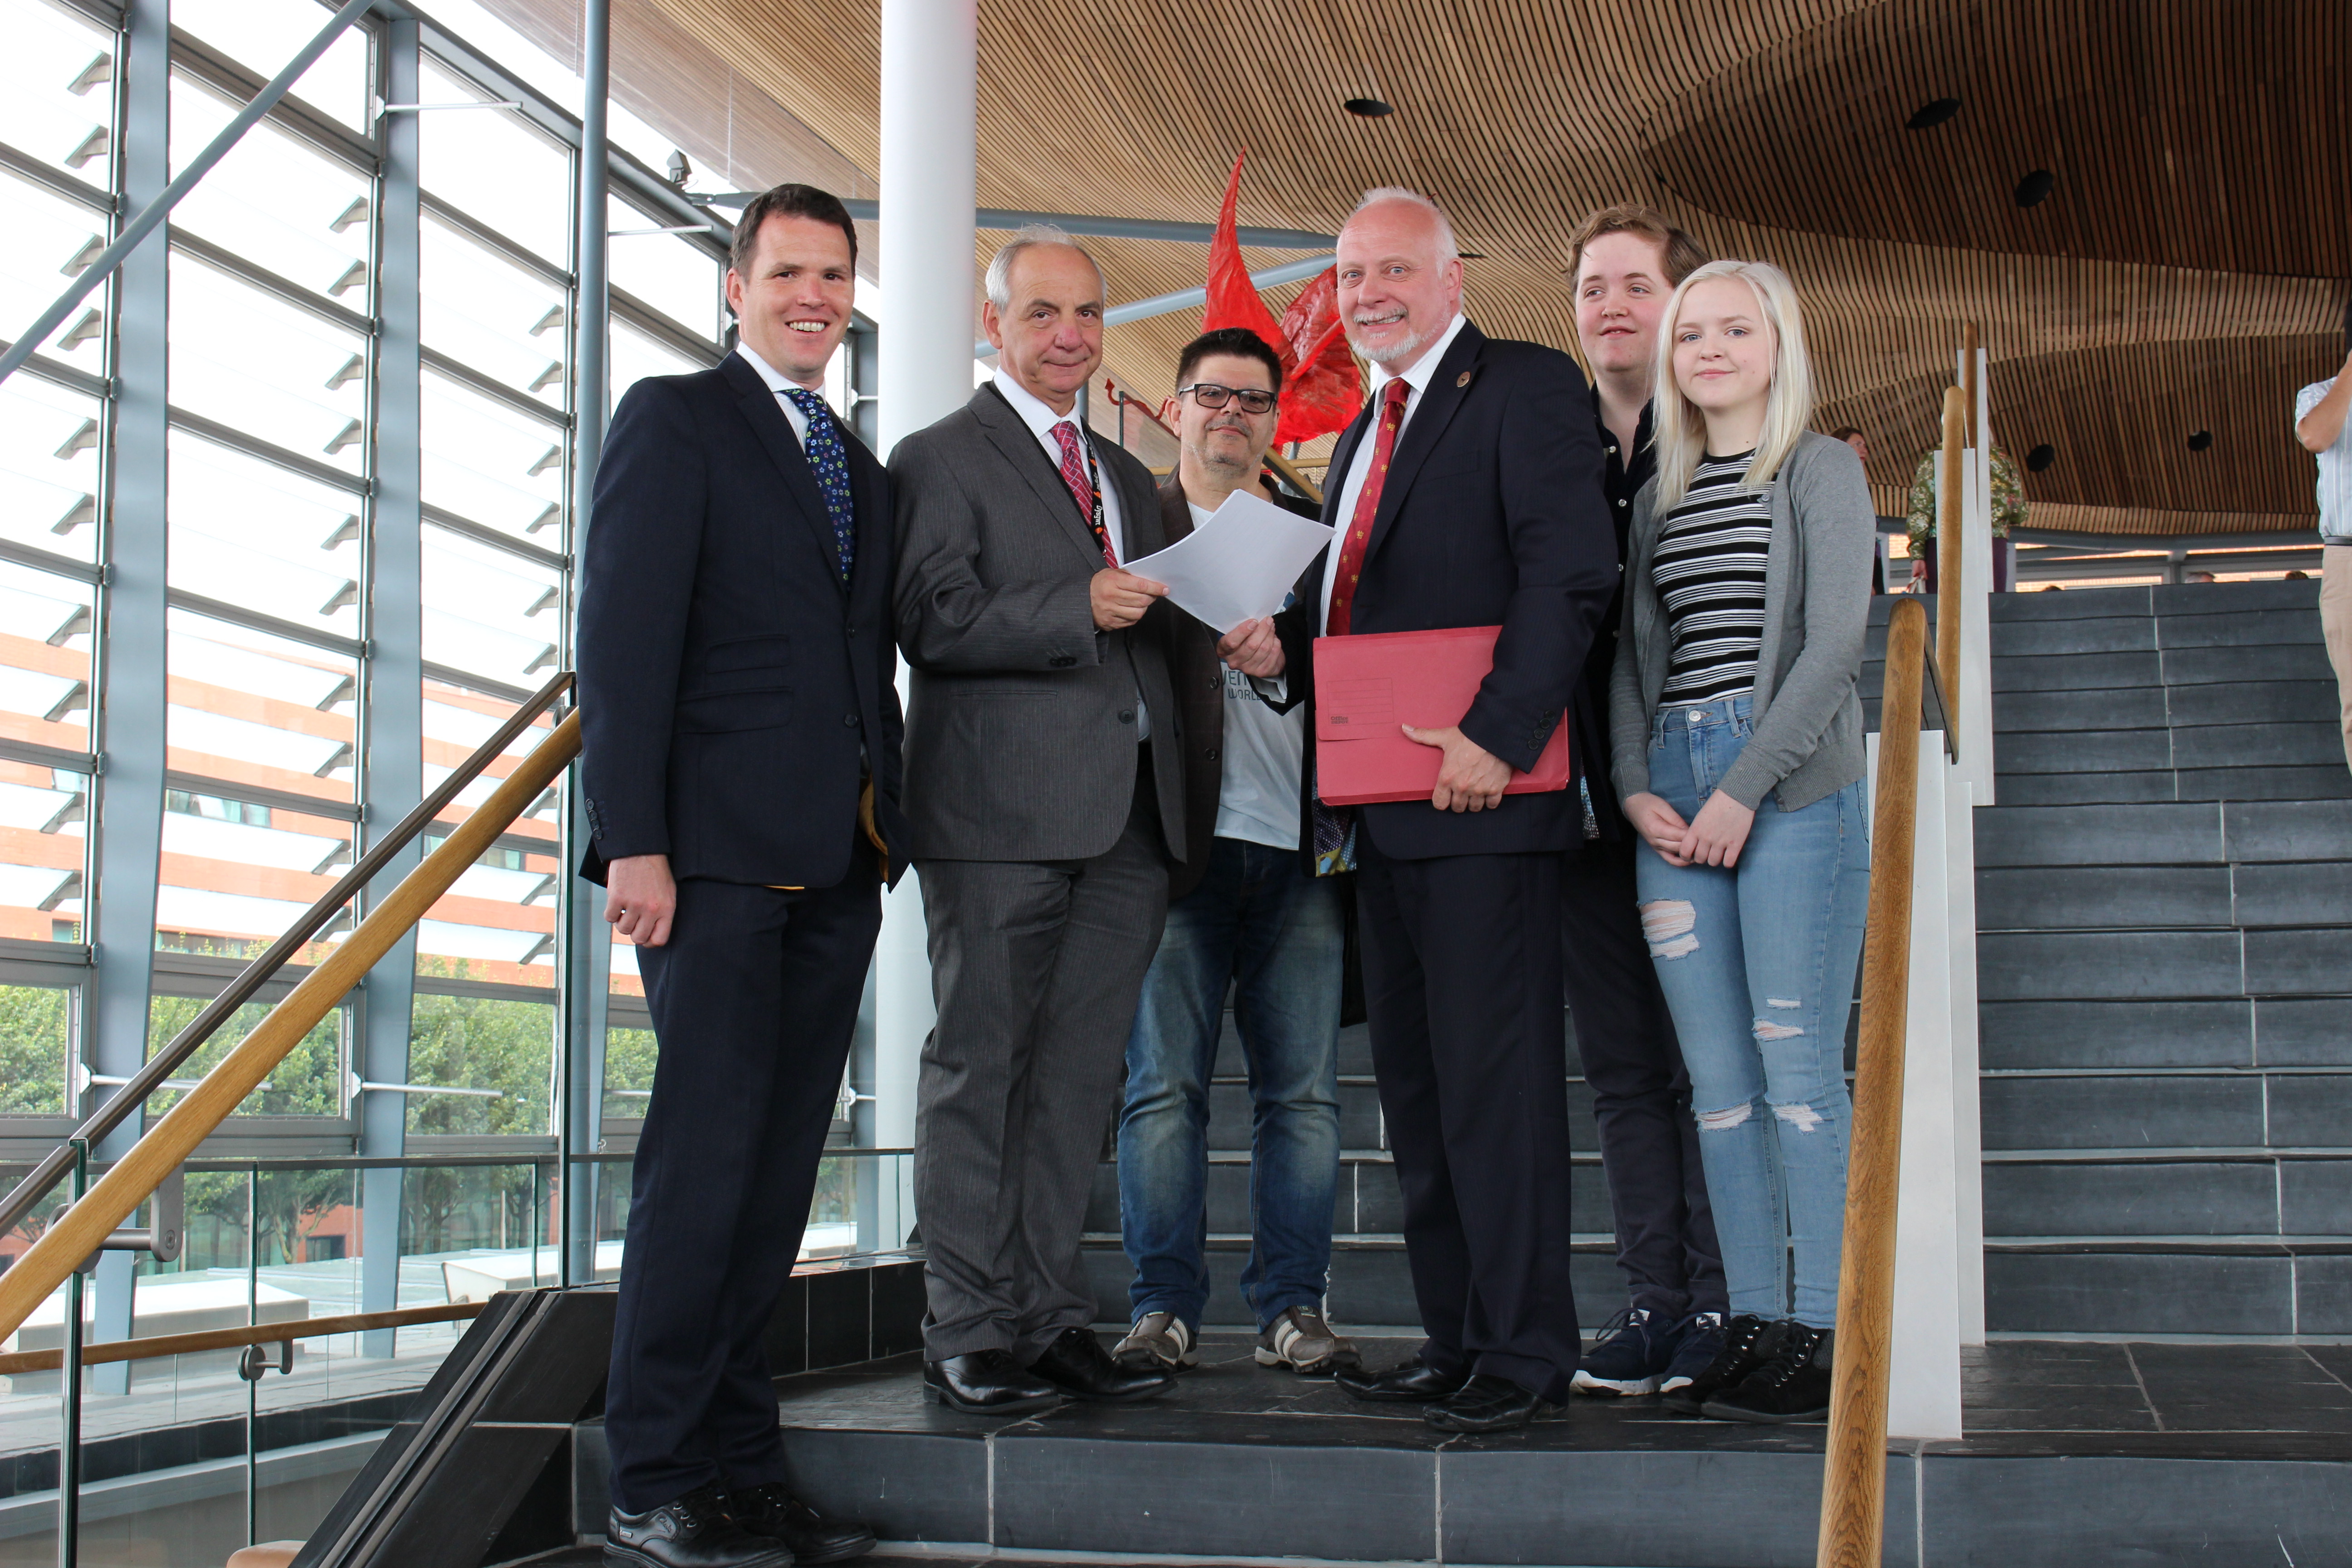 Petitioners present their petition to Mike Hedges AM and Rhun ap Iorwerth AM on the Senedd steps